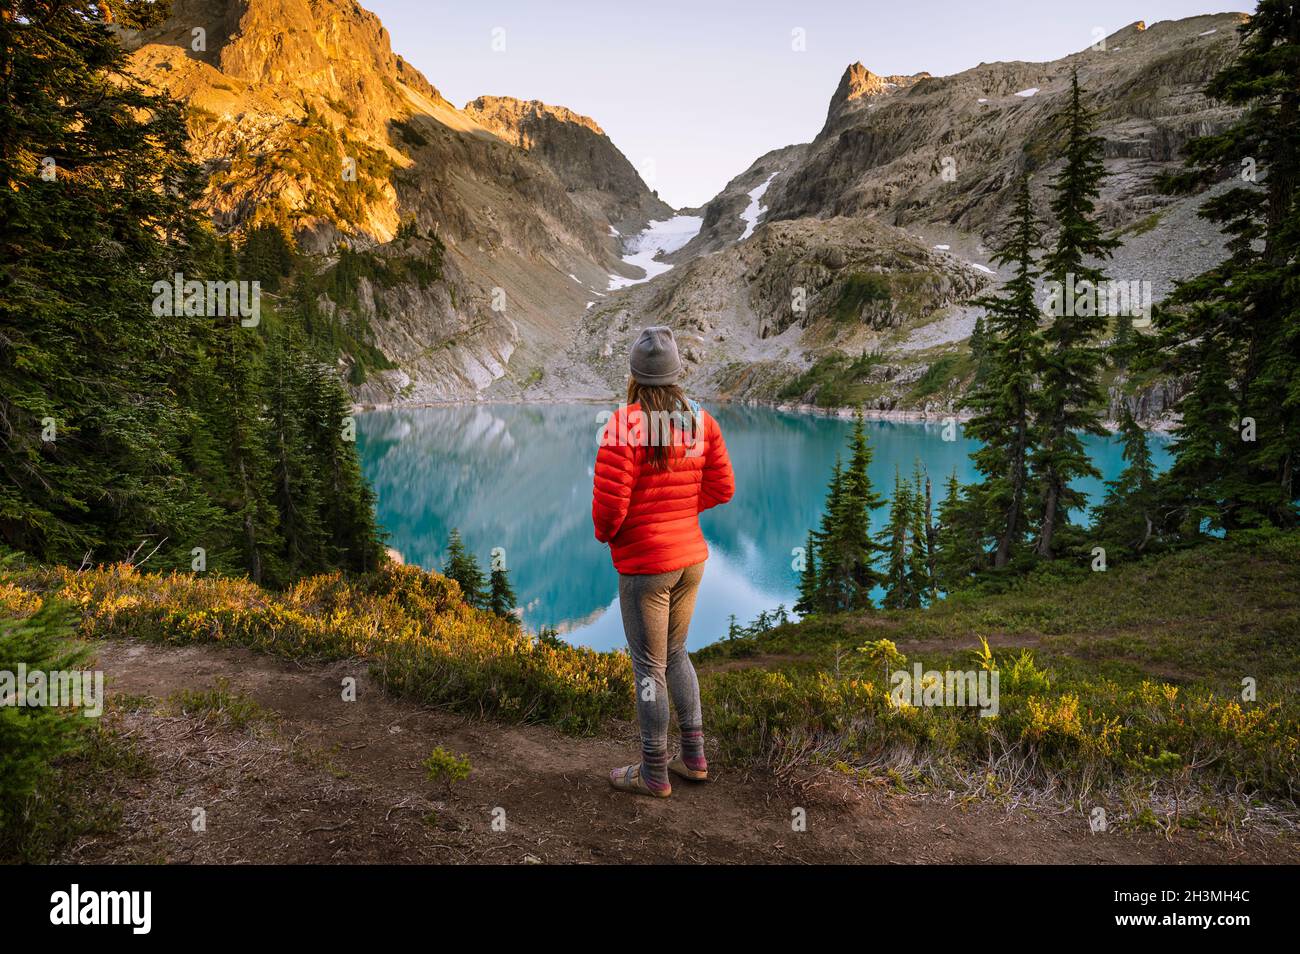 Female In Red Jacket Looking At Blue Alpine Lake At Sunset Stock Photo